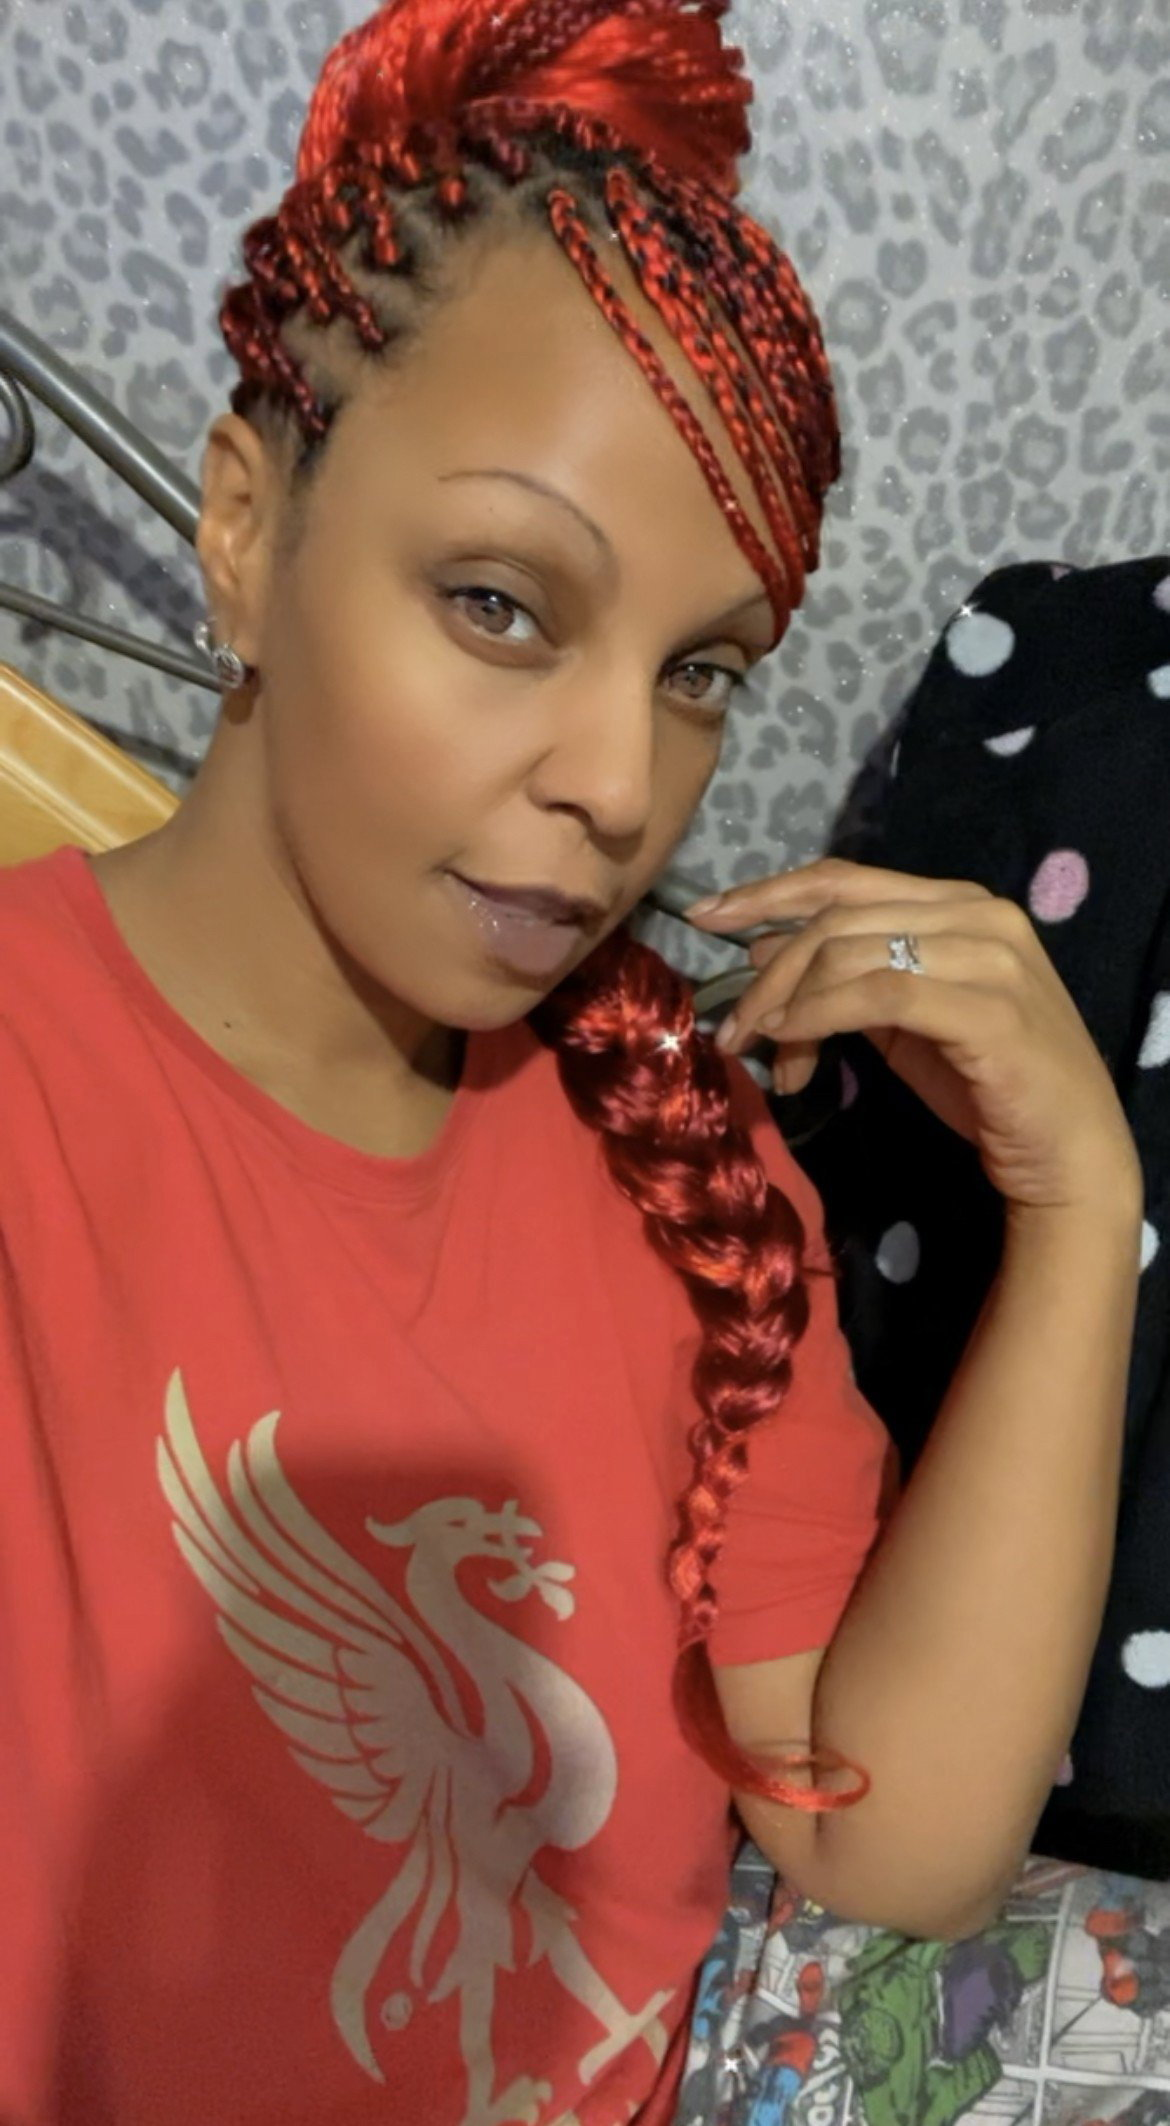 Watch the Photo by MistressMD with the username @MistressMD, who is a star user, posted on January 12, 2022 and the text says 'Two Discord servers where your guaranteed to find Me for instant interactions!! PLUS a plethora of perverted, passionate & ✅VERIFIED✅ Deliciously Devilish Dommes 👀👸🏾🤑

Cum join in the filthy fun & games over at:..'